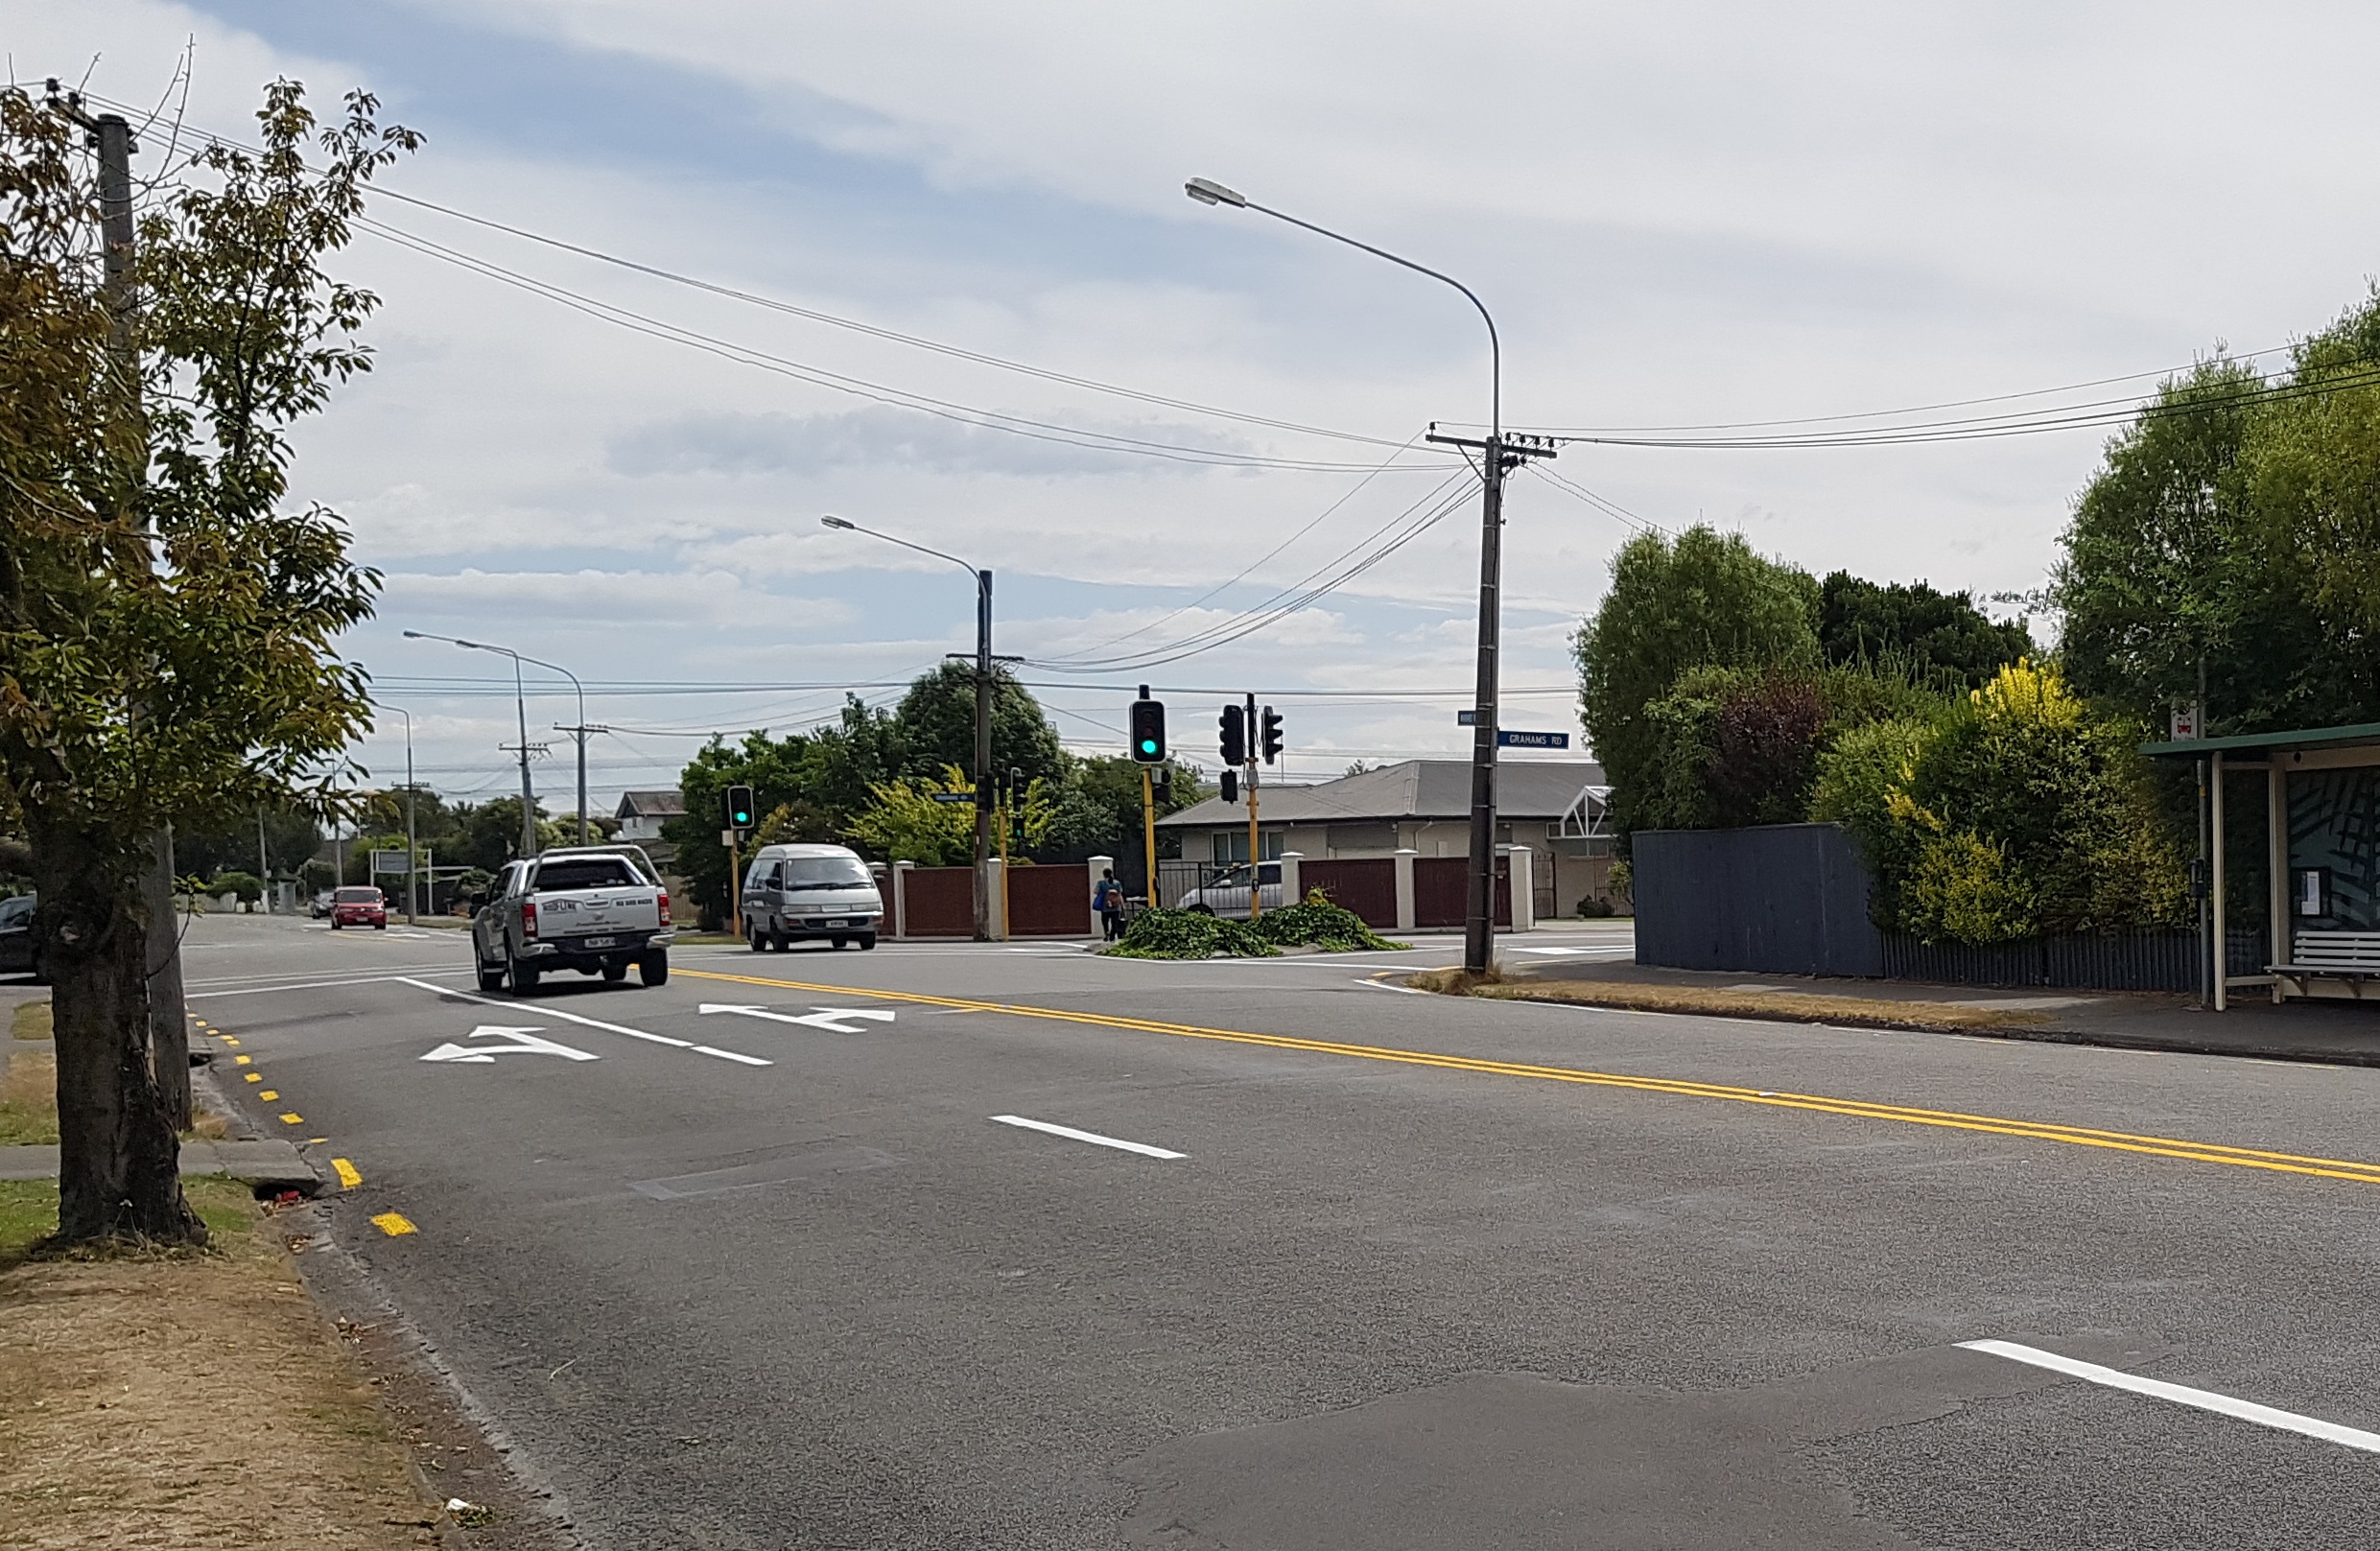 Current Wairakei and Grahams Rd intersection lane layout 